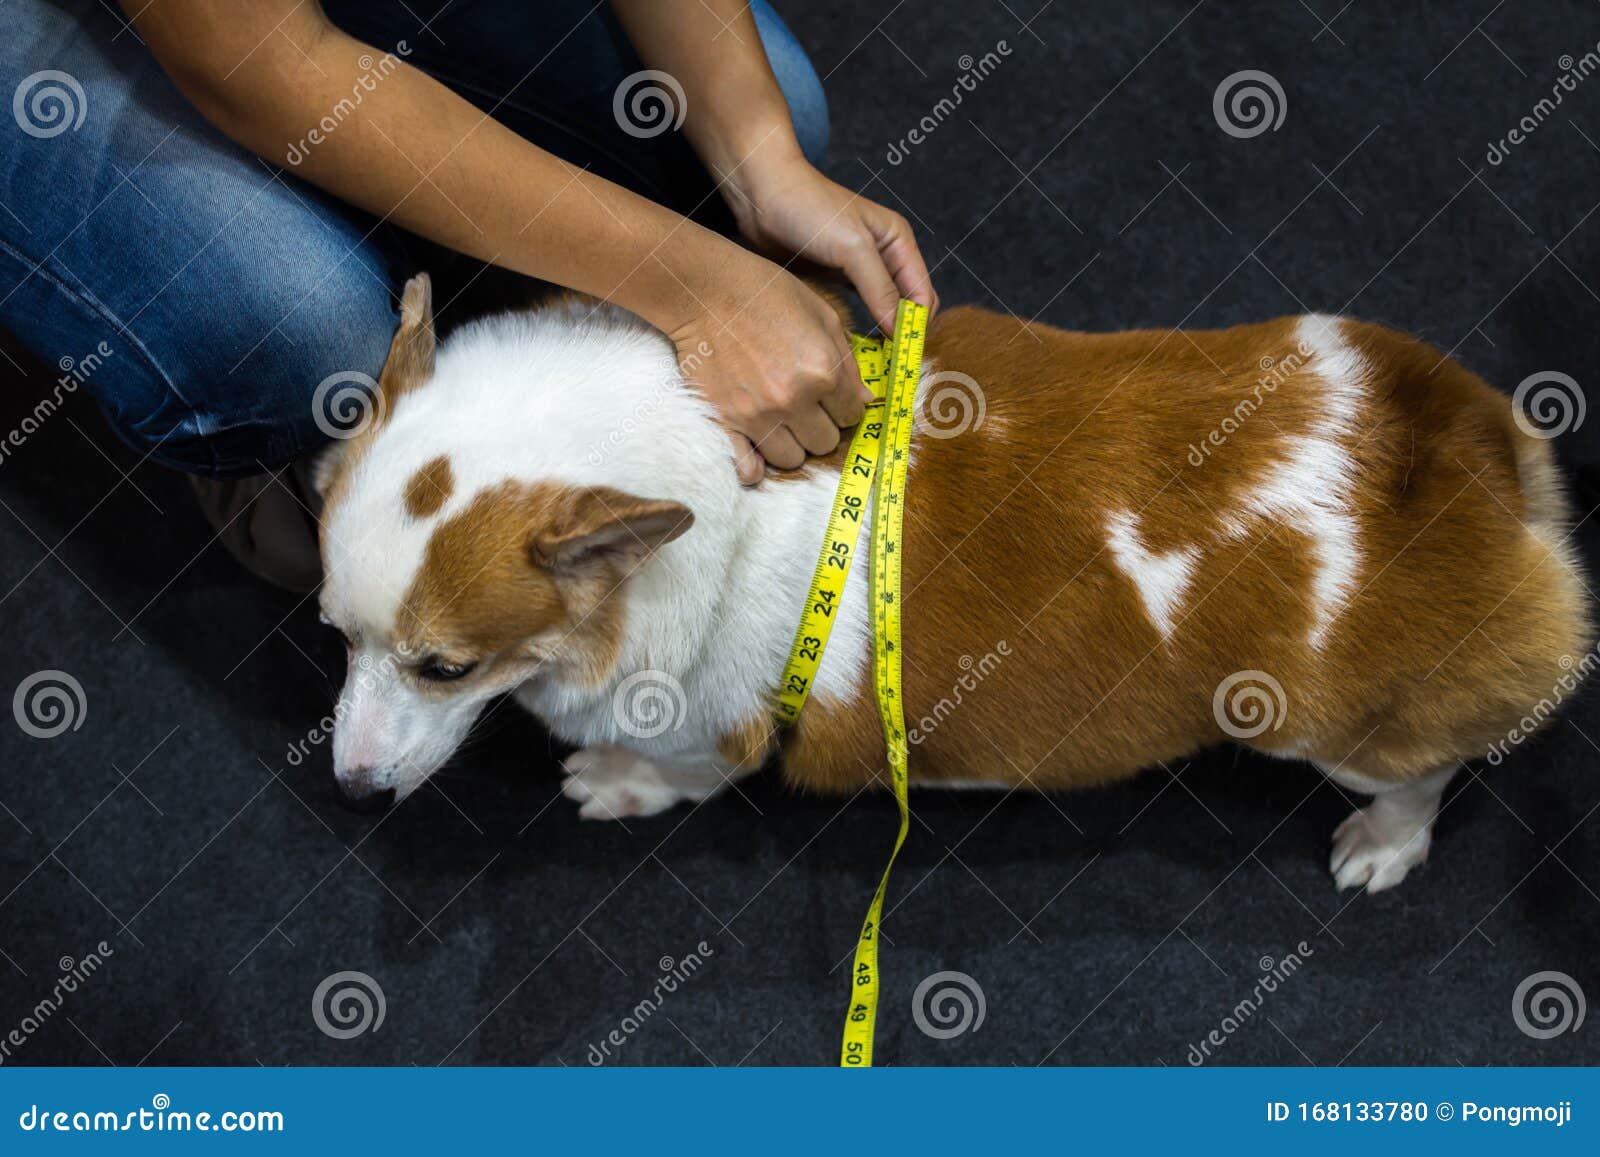 dog corgi overweight and fatness with tapeline